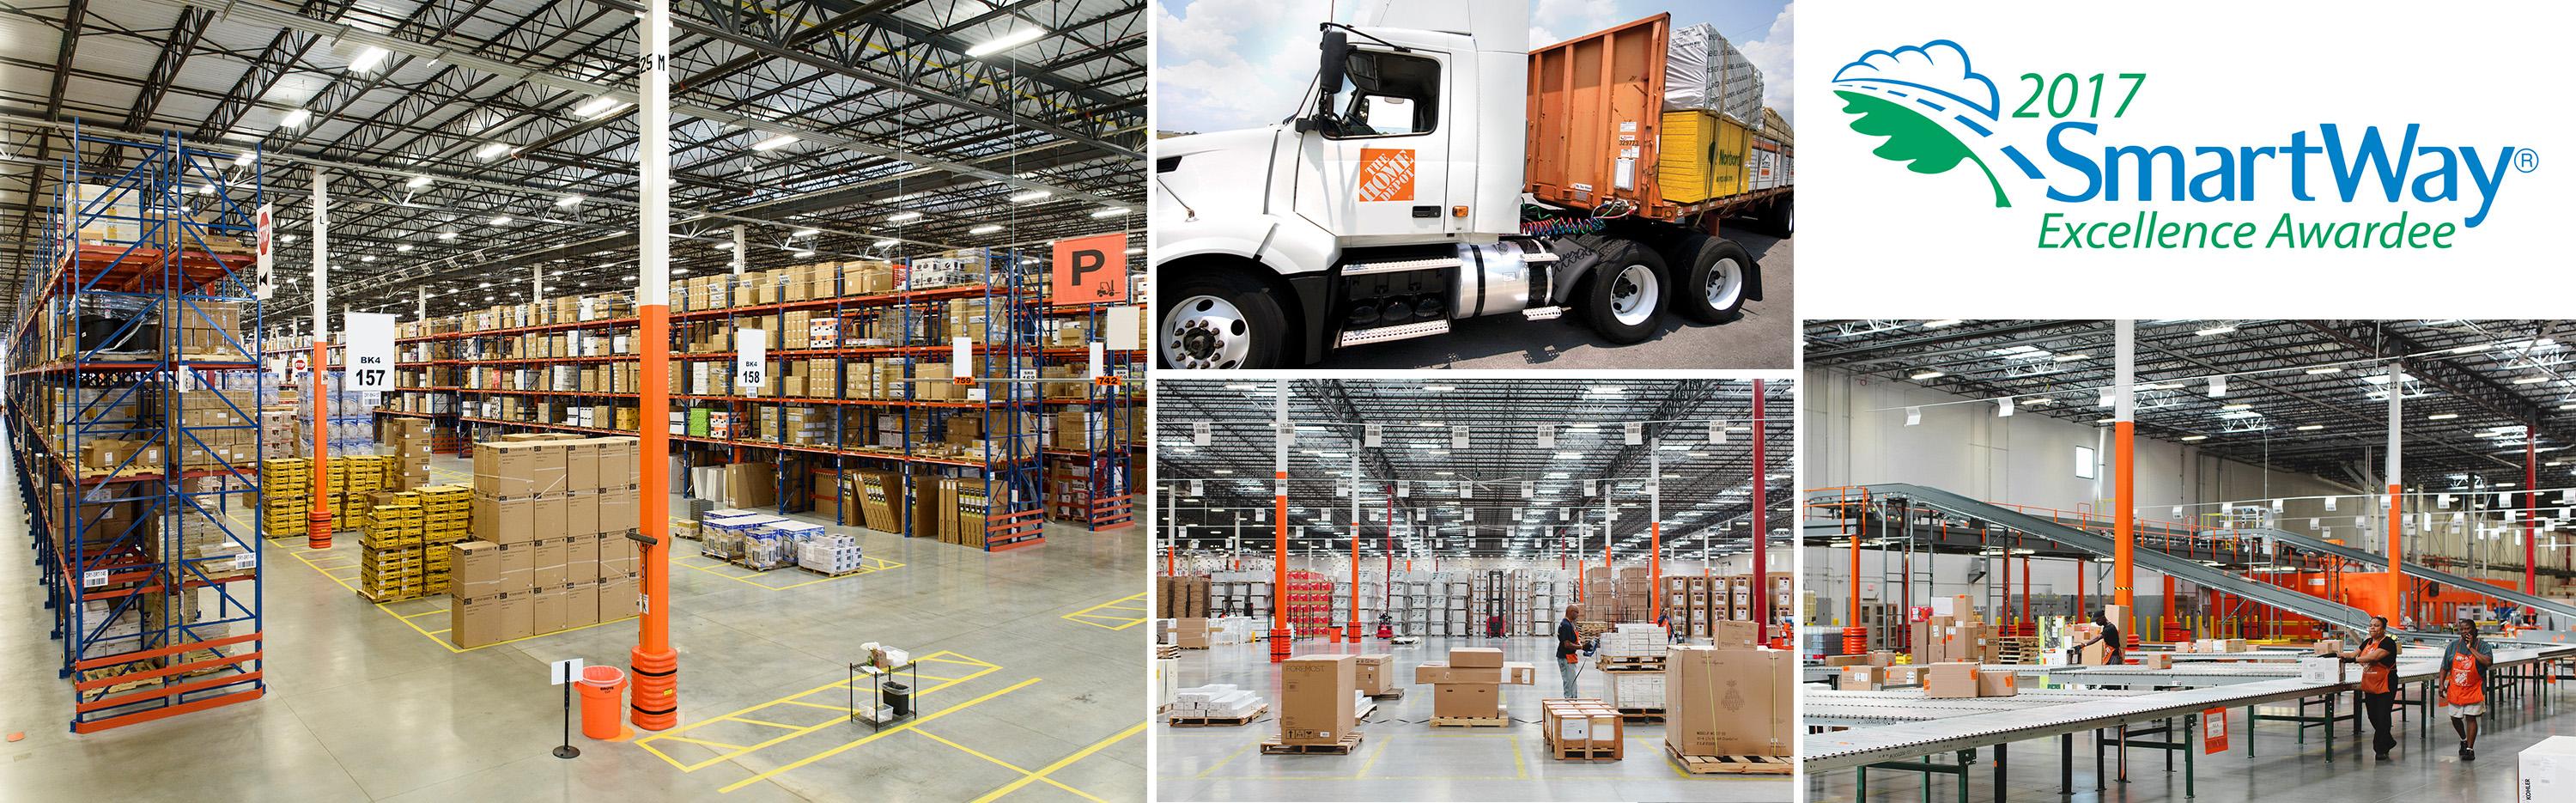 Home Depot's supply chain